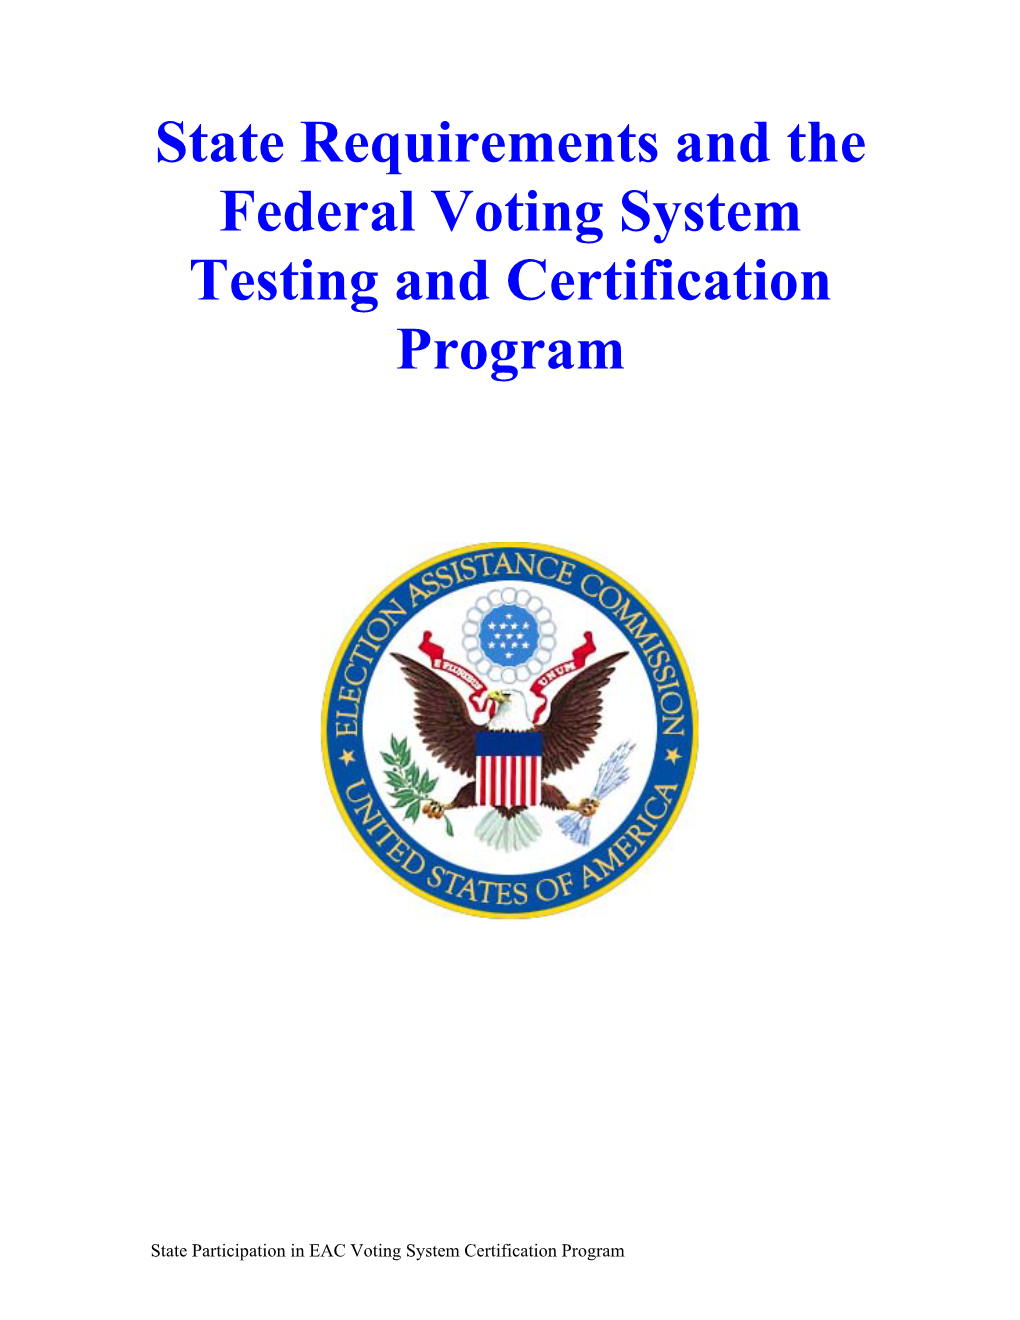 State Requirements and the Federal Voting System Testing and Certification Program